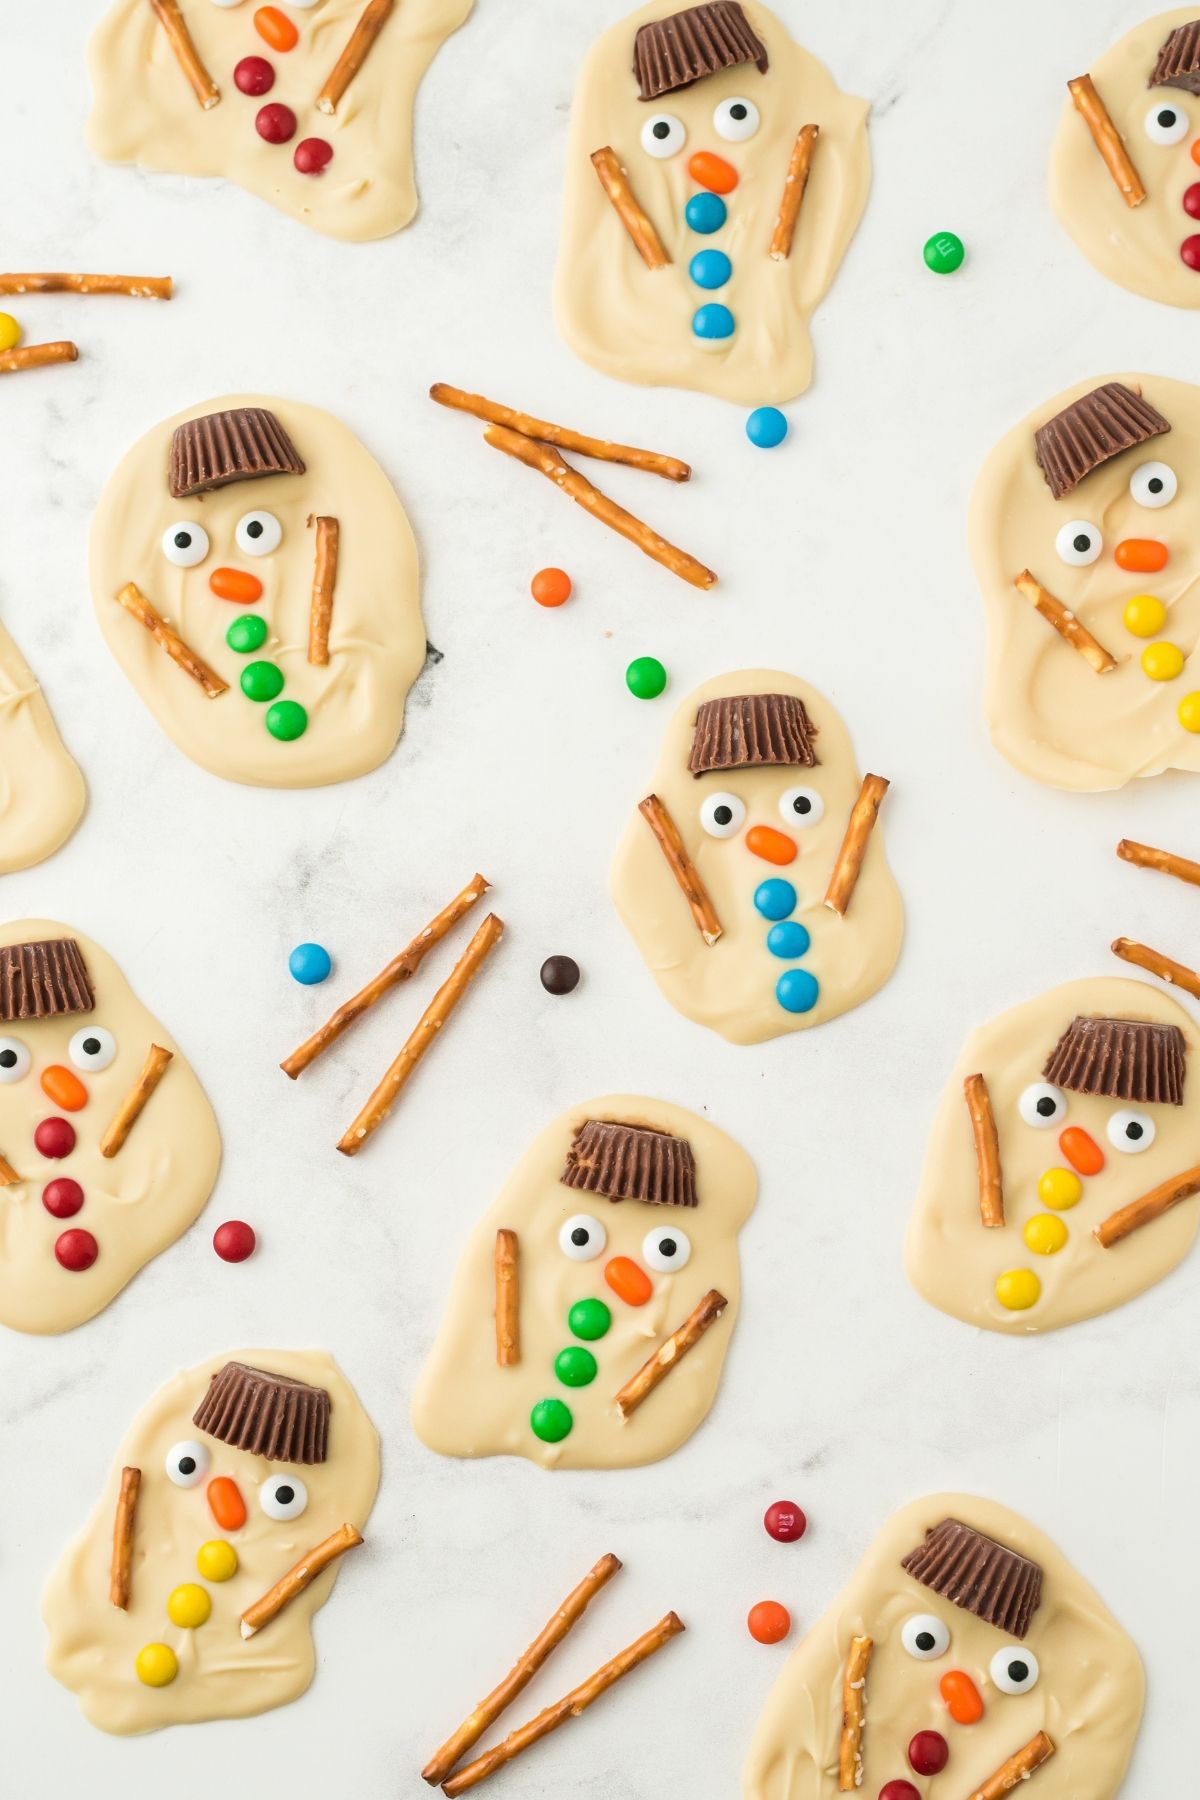 white chocolate snowman with colored buttons and pretzel sticks for arms on counter